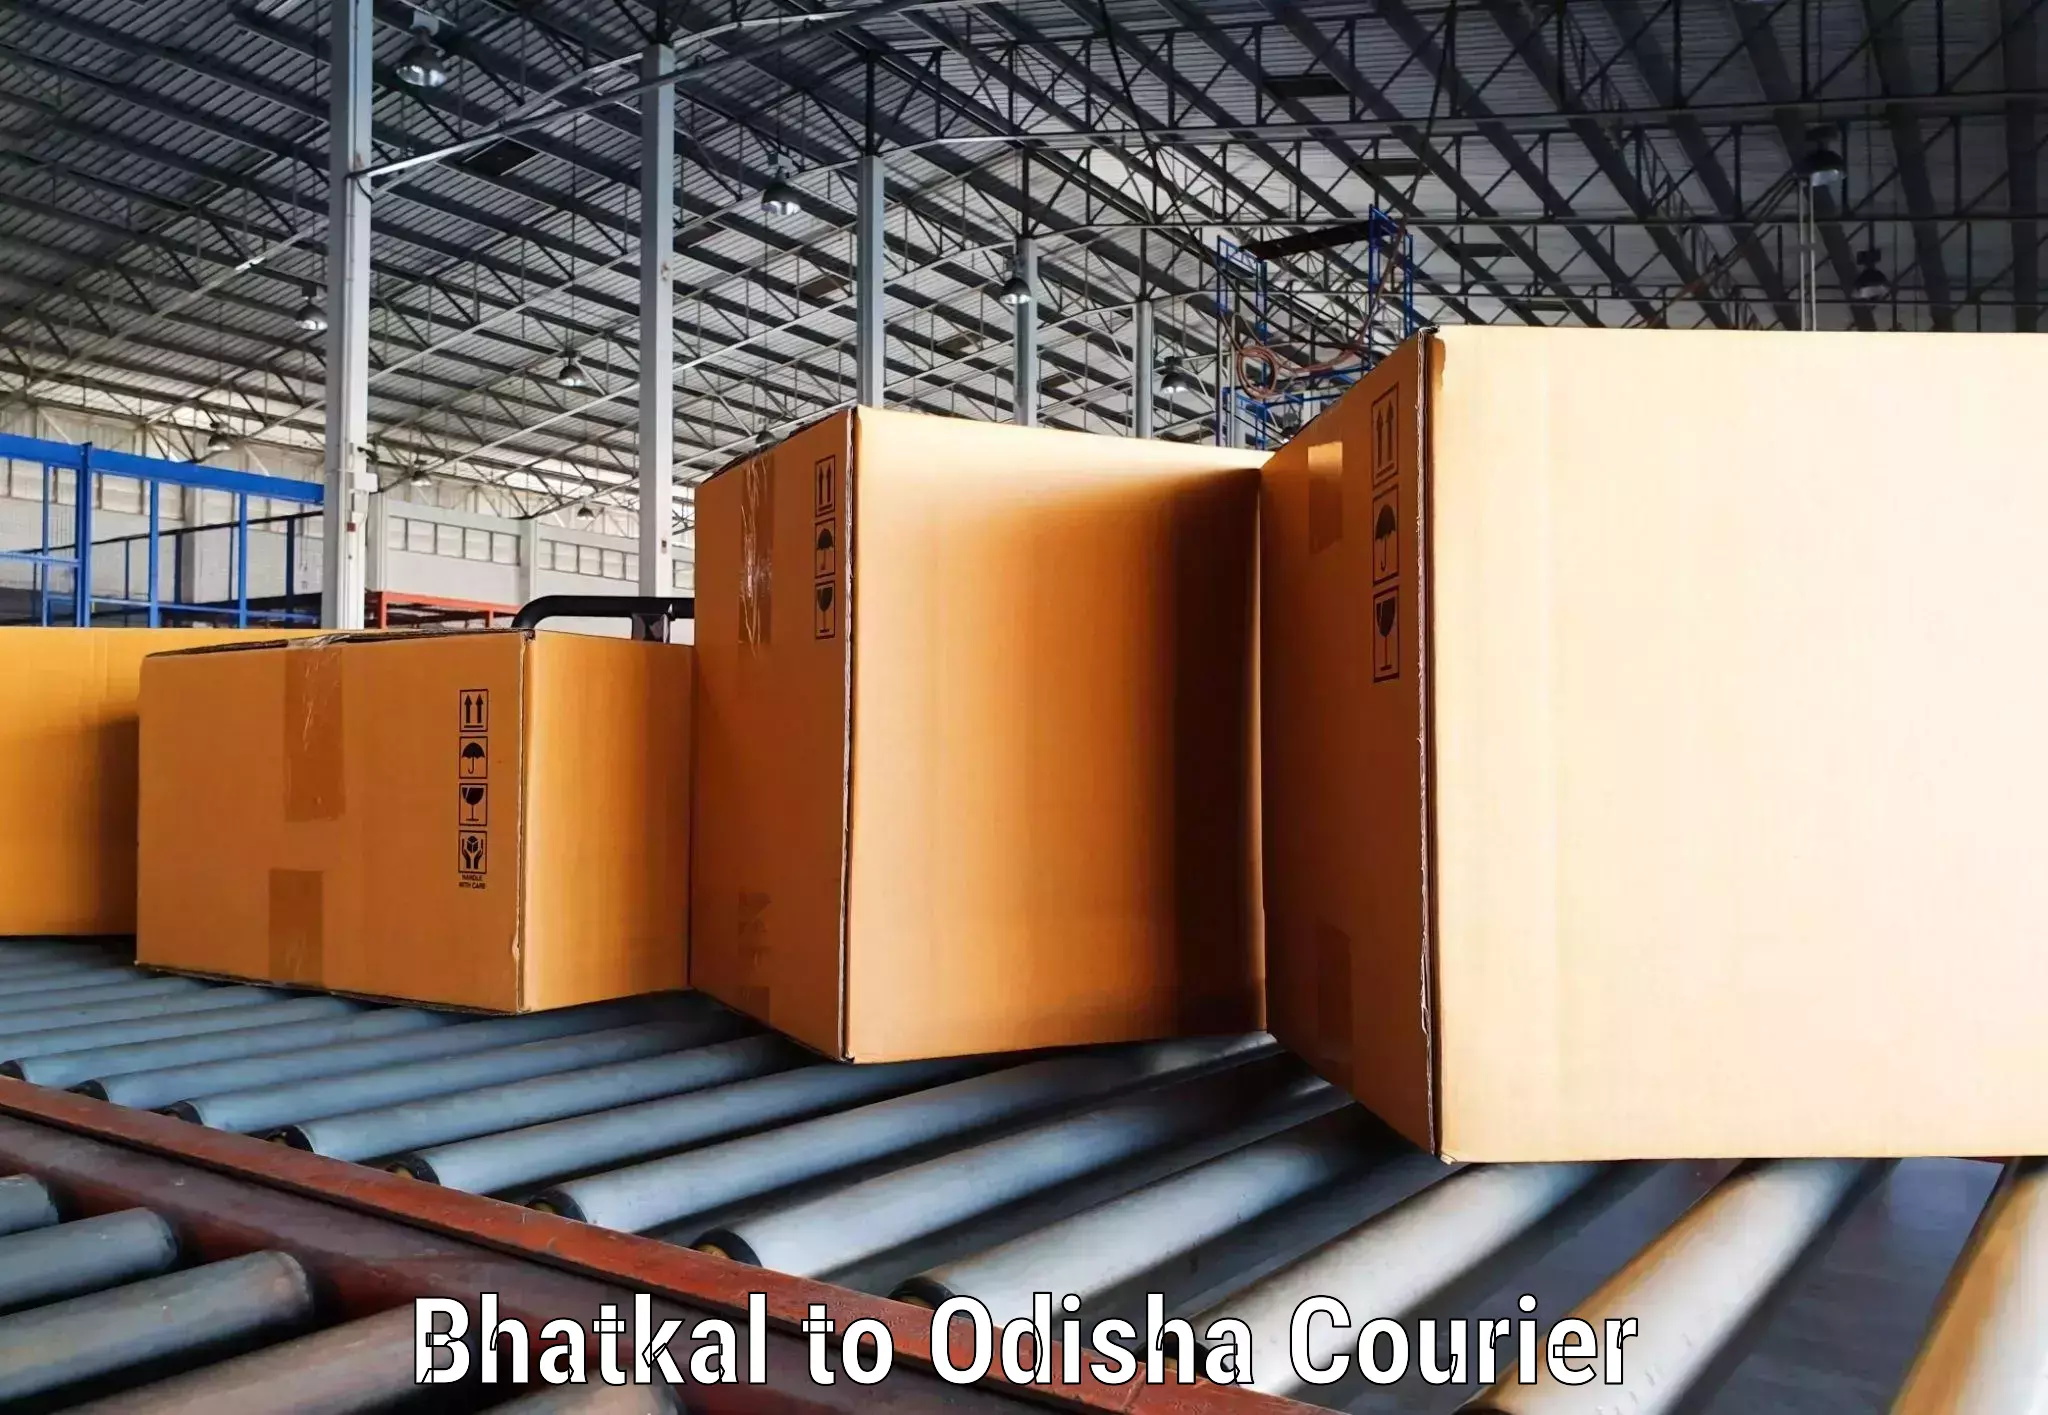 Express courier facilities in Bhatkal to Sohela